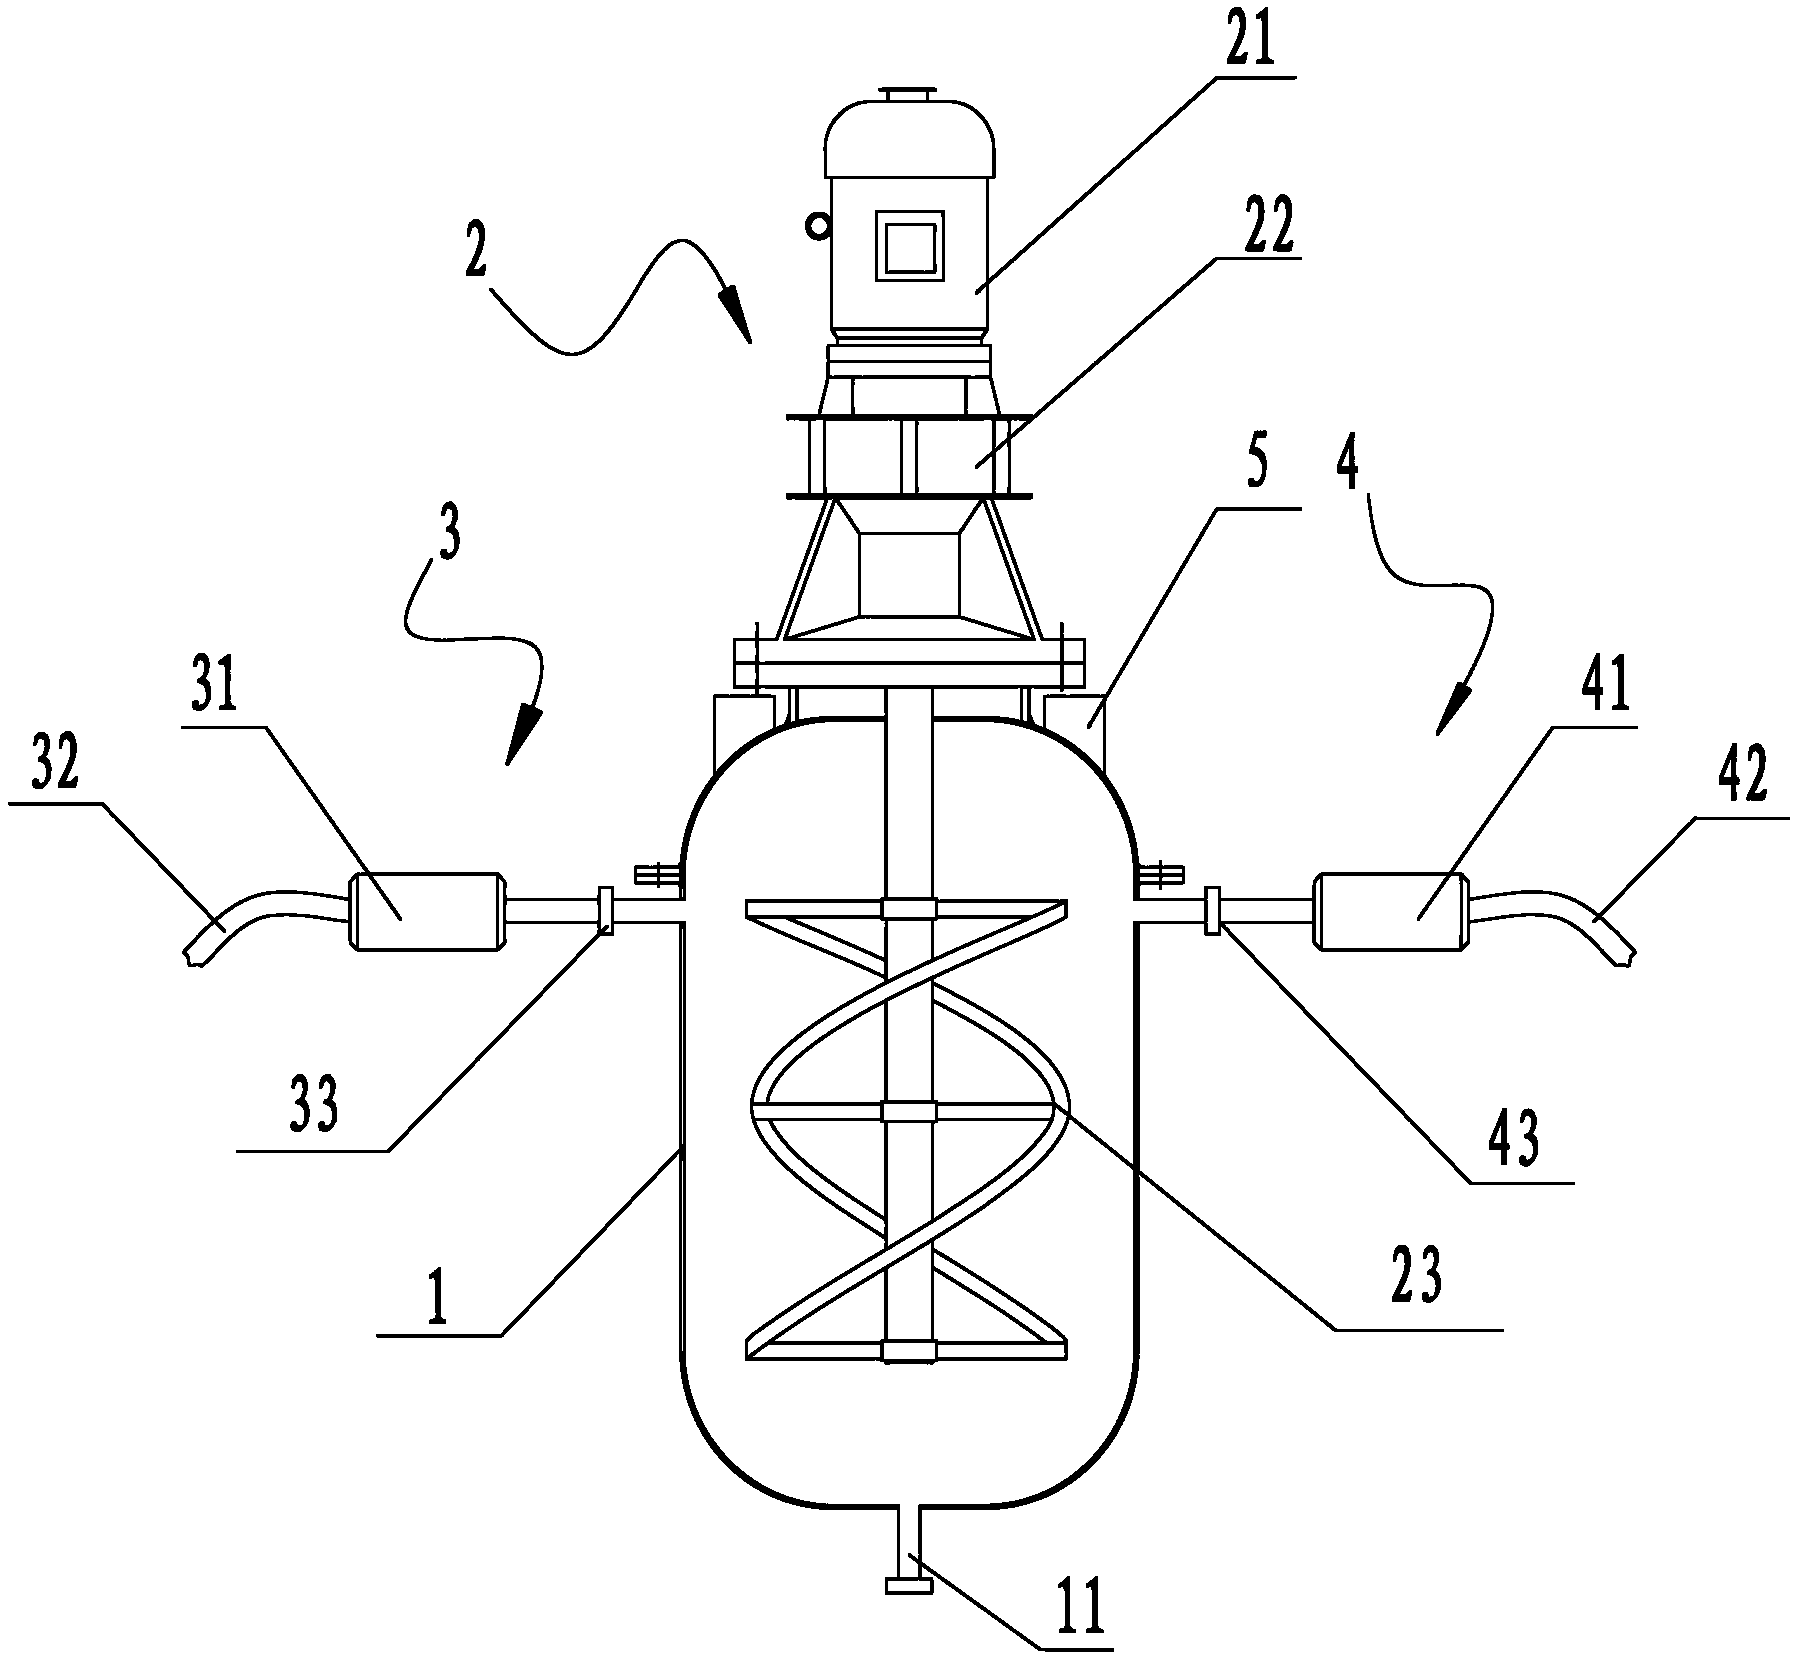 Automatic material mixing device